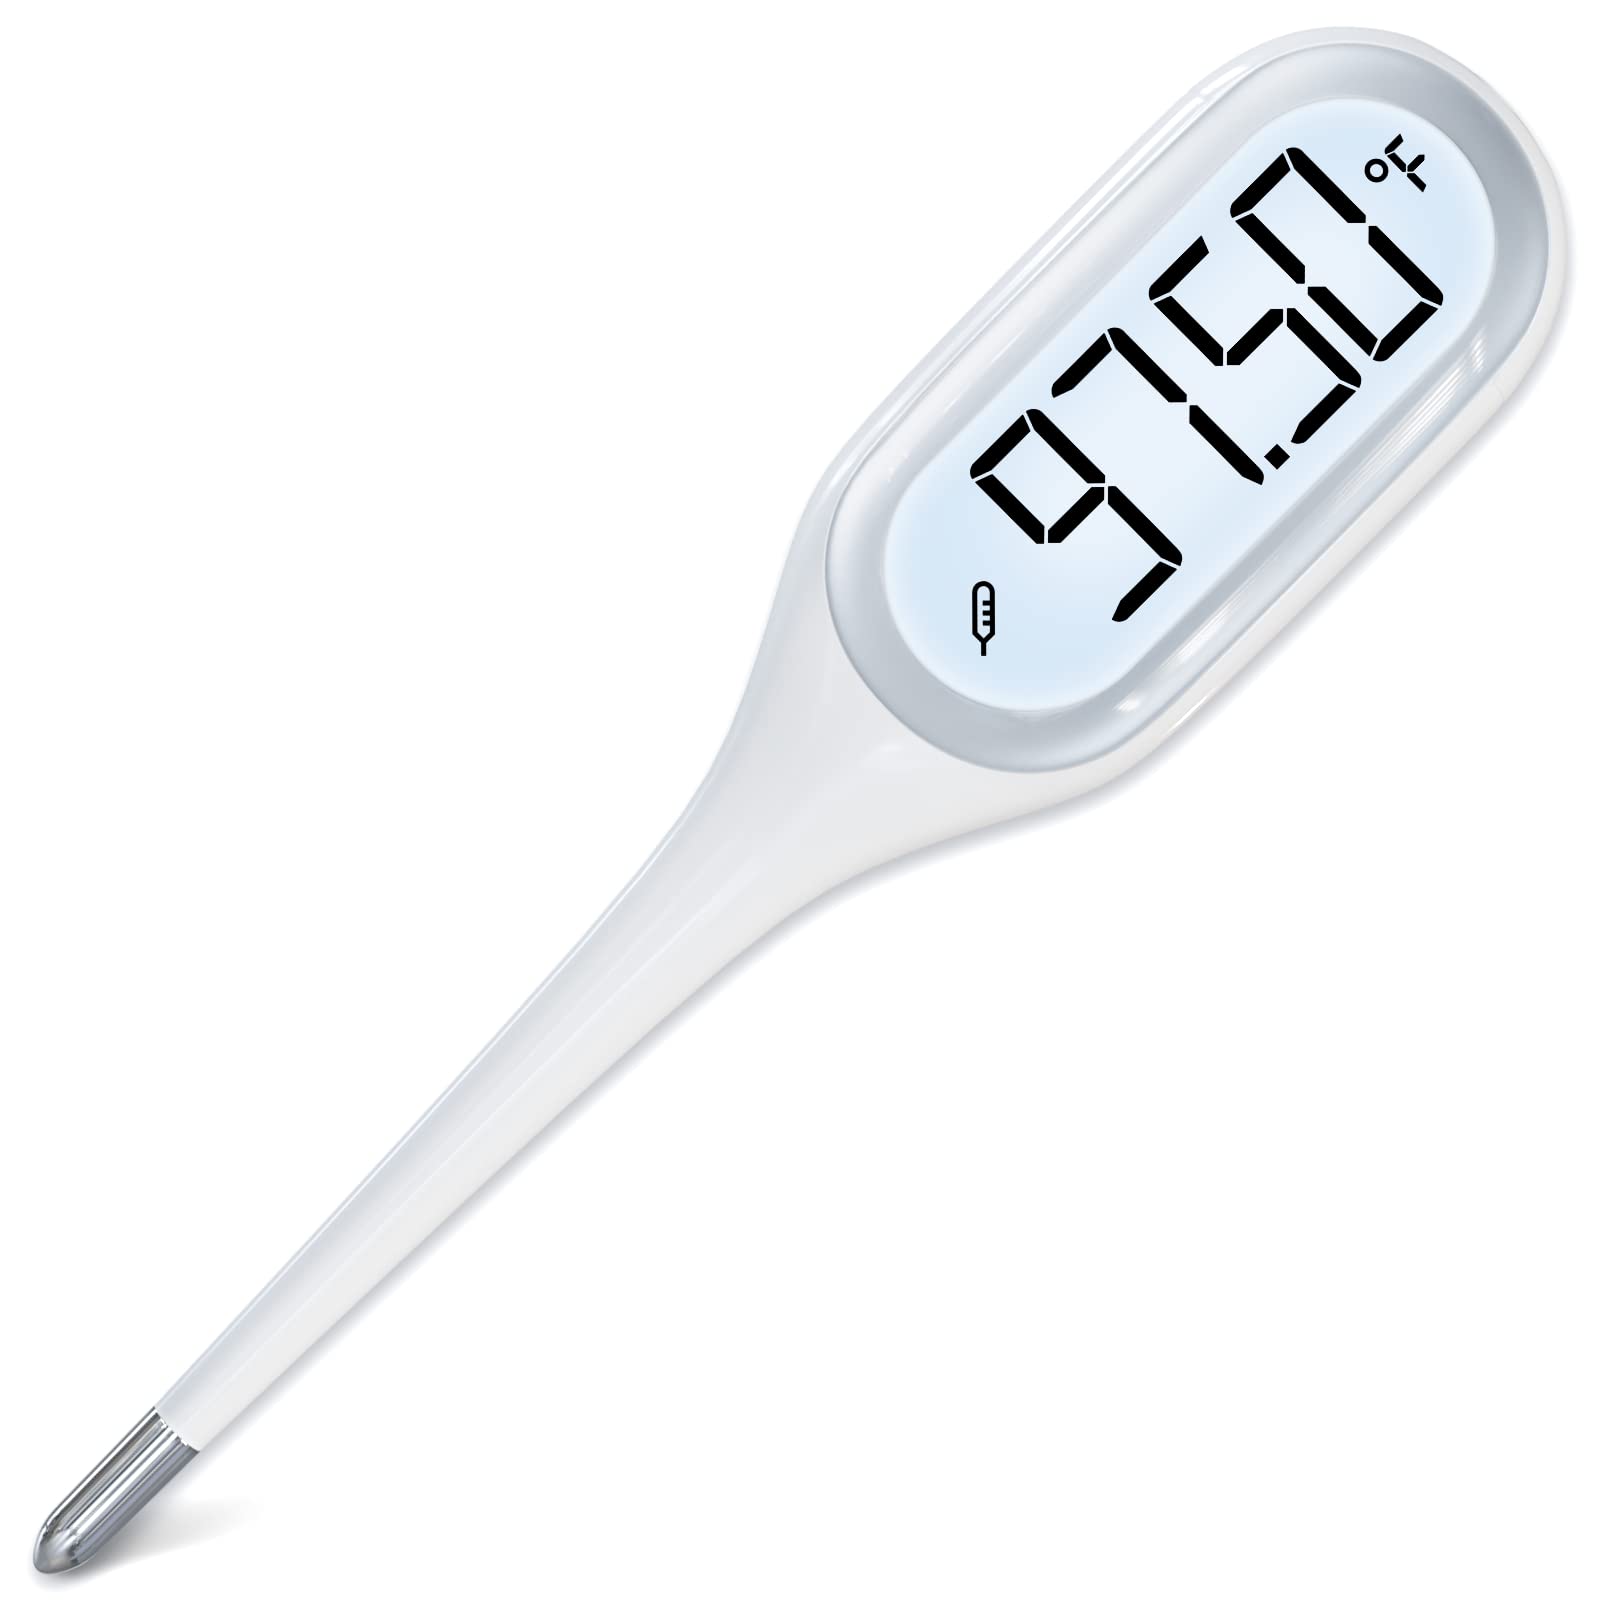 Digital Basal Body Thermometer: Easy Home Accurate BBT for Ovulation  Tracking & Fast Oral Thermometer with Large LCD Backlit Display, 1/100th  Degree High Precision & Memory Recall